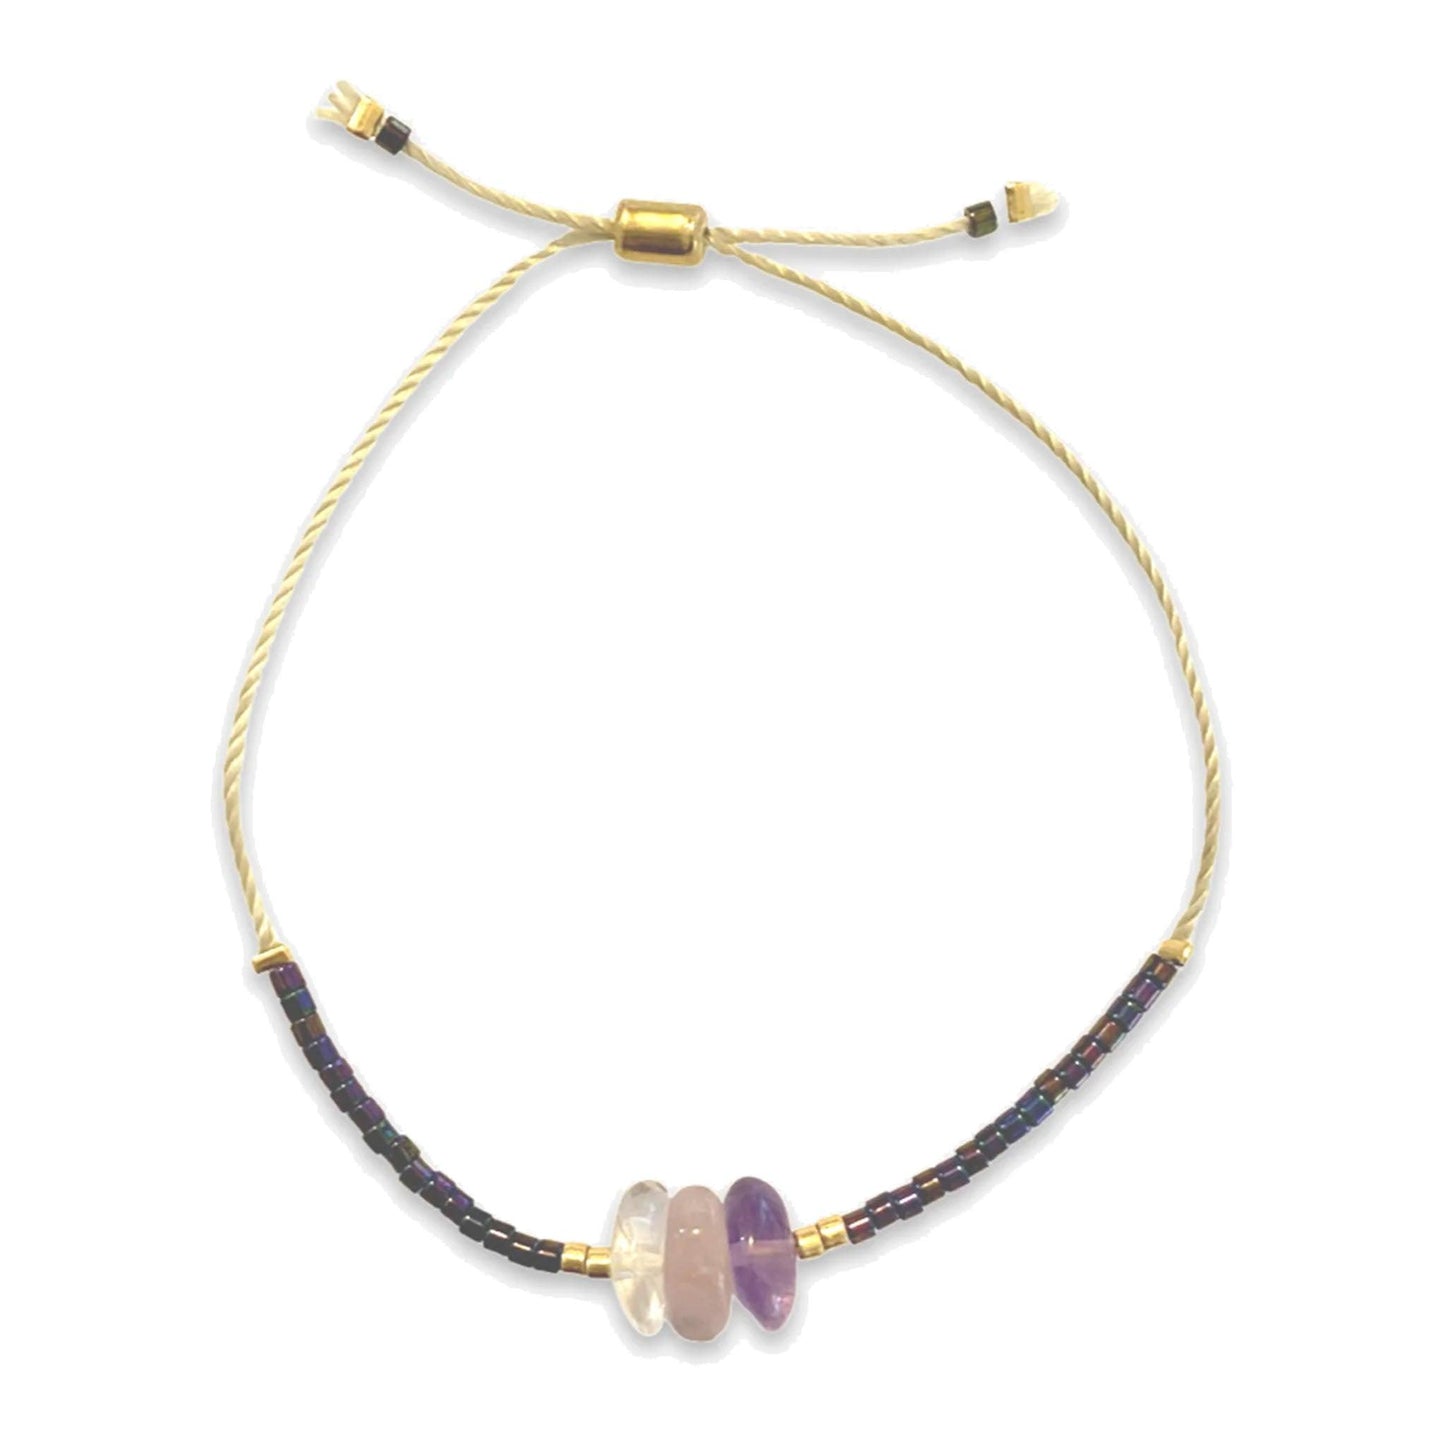 Love and Happiness Intention Bracelet